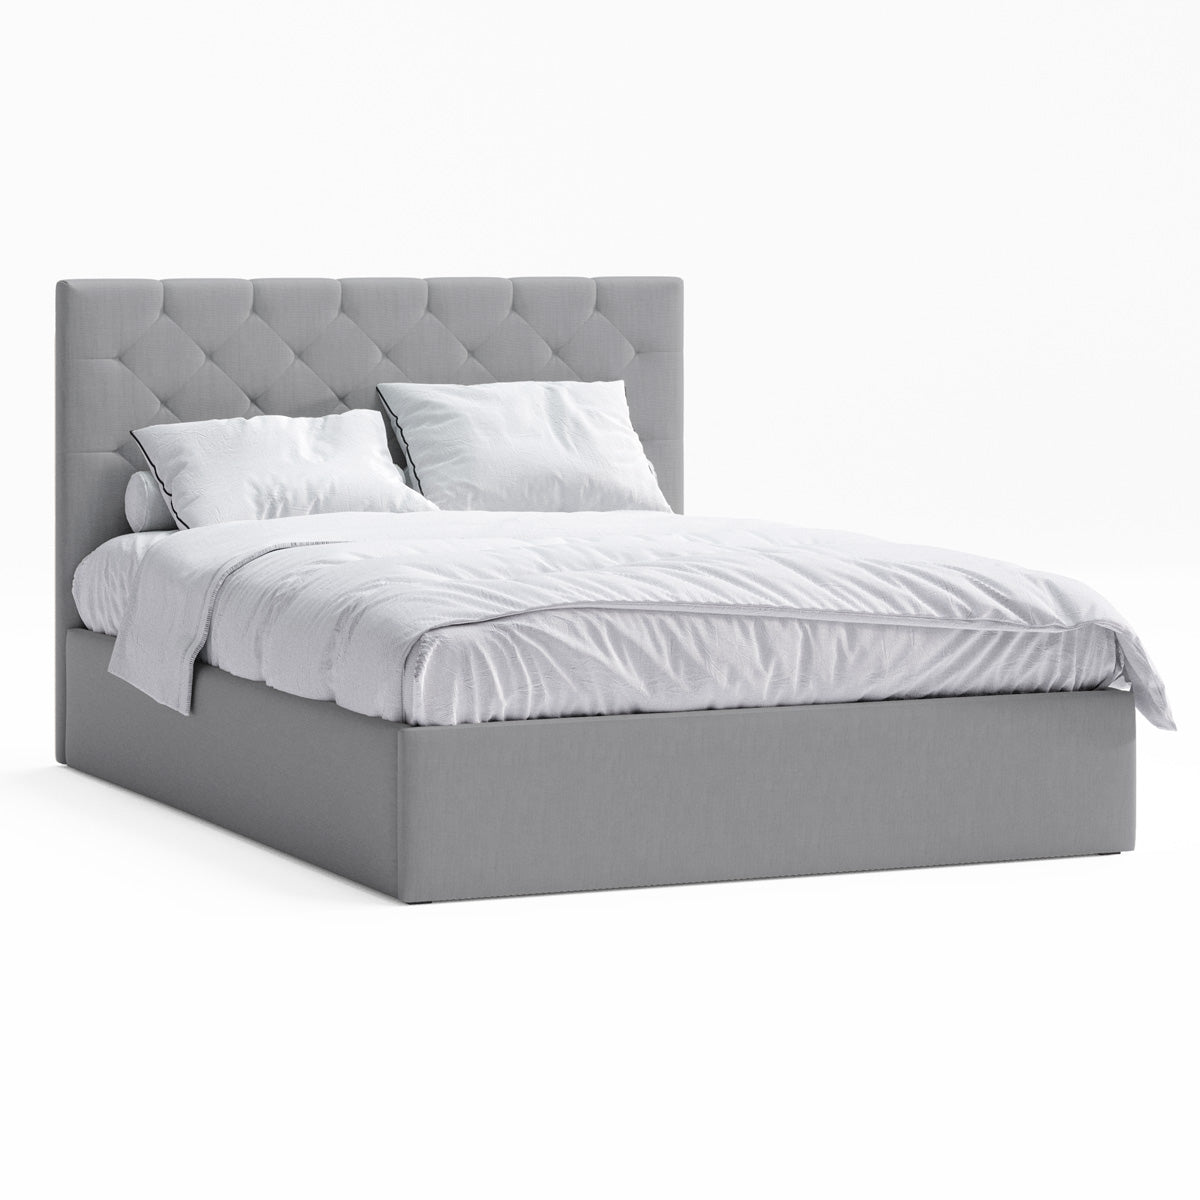 Webster Gas Lift Storage Bed Frame (Grey Fabric)